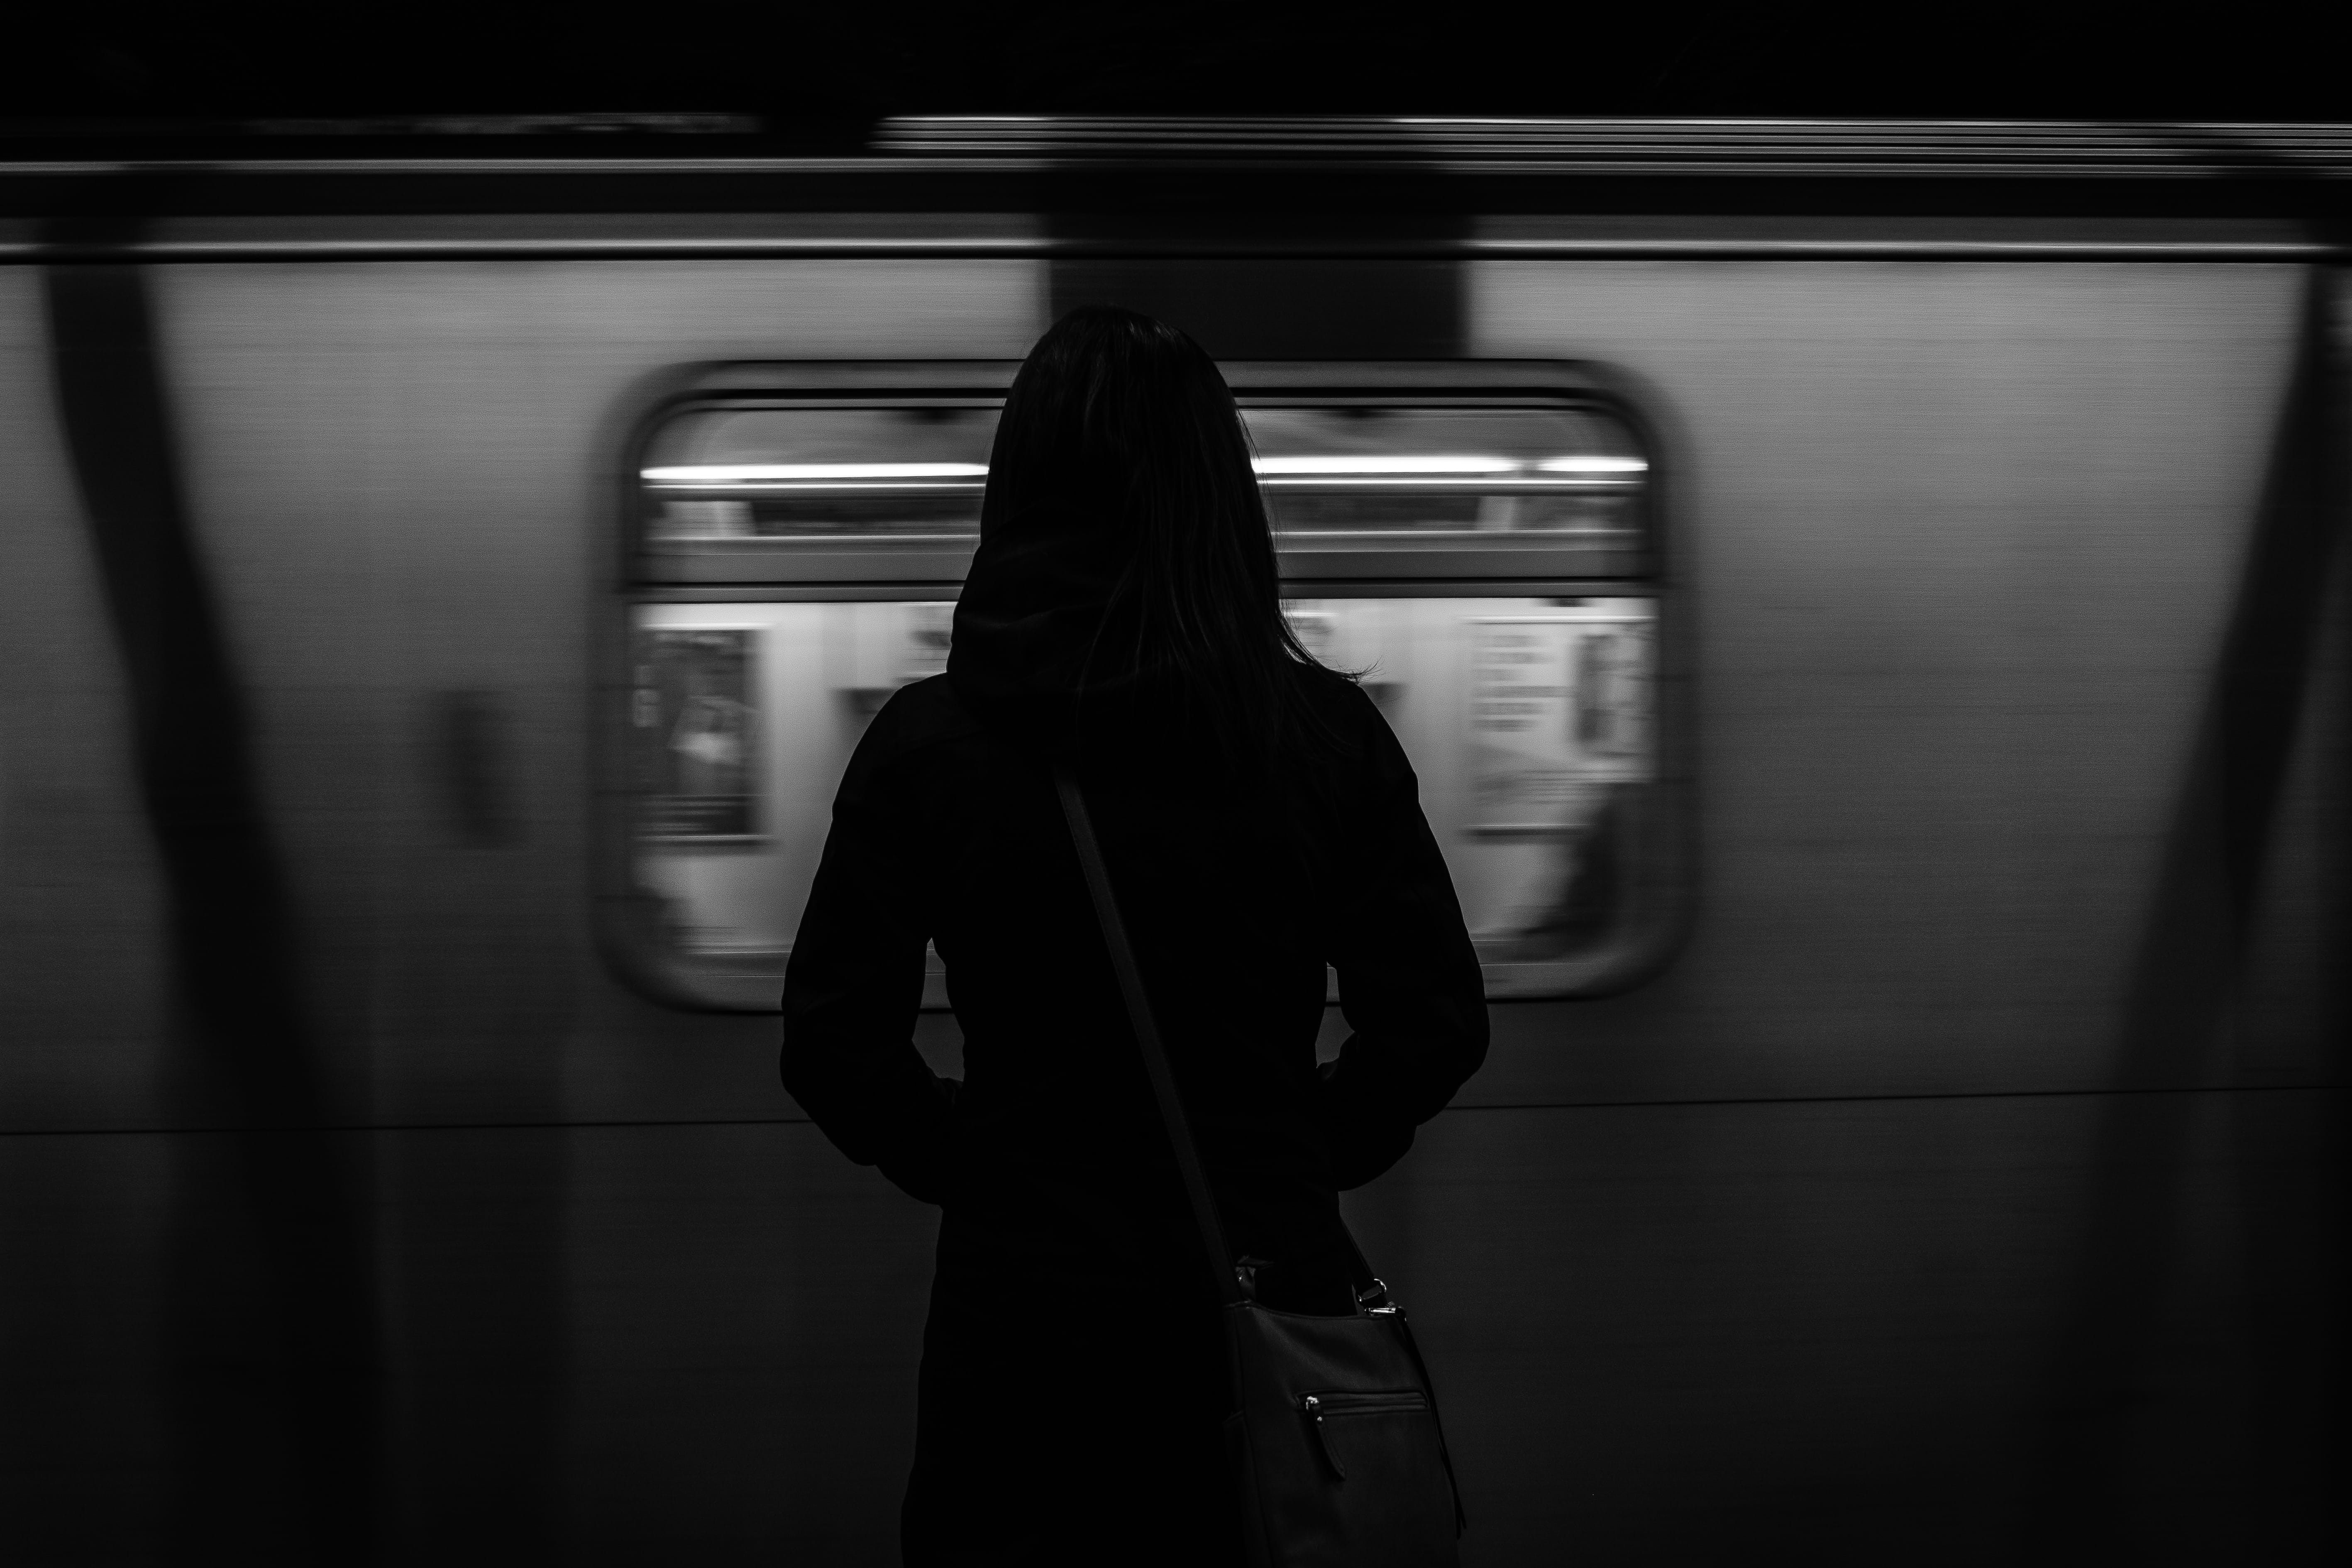 Free Download Hd Wallpaper Grayscale Photography Of Woman Standing Near Running Train Rail